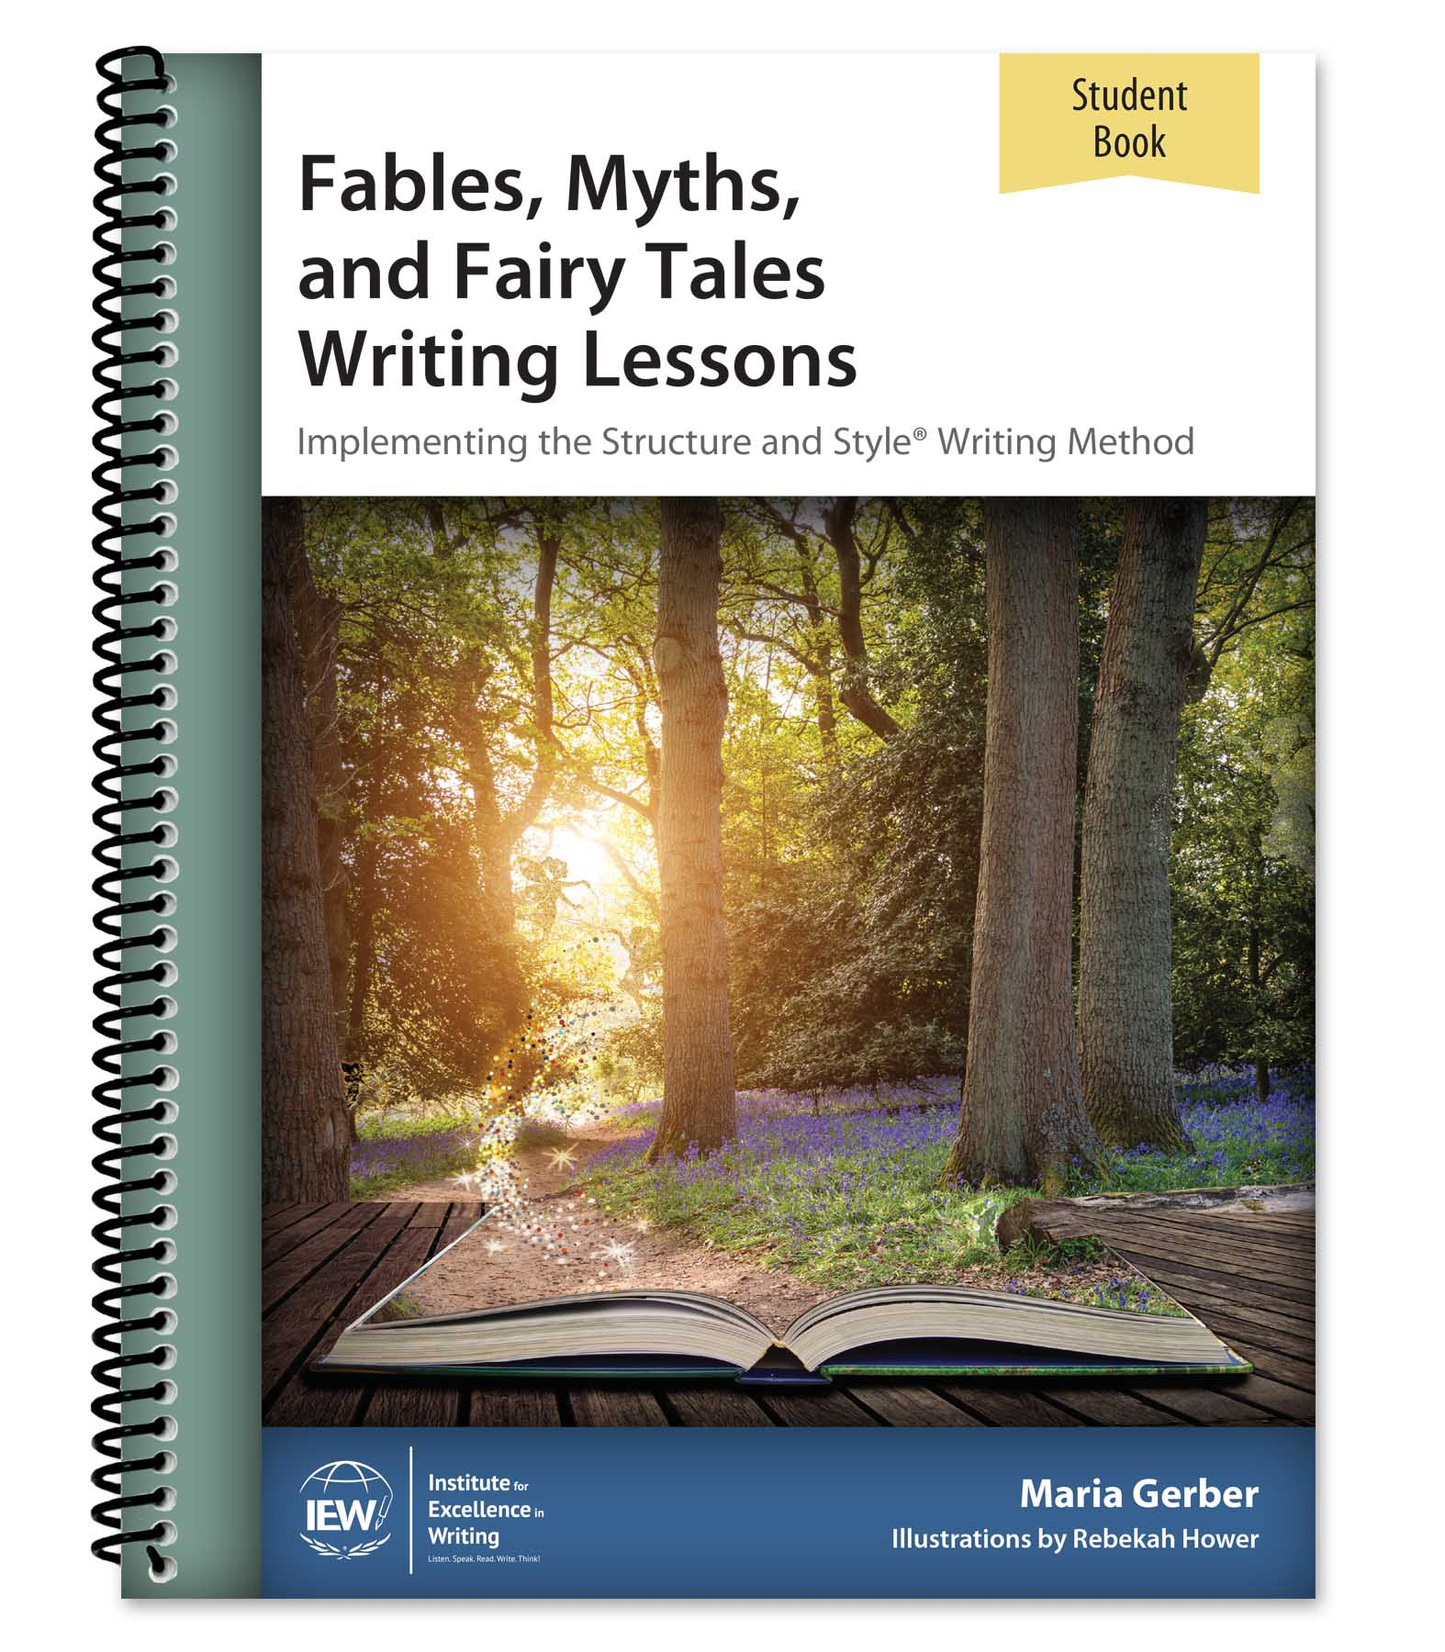 Fables, Myths and Fairy Tales. Themed Based Writing Lessons